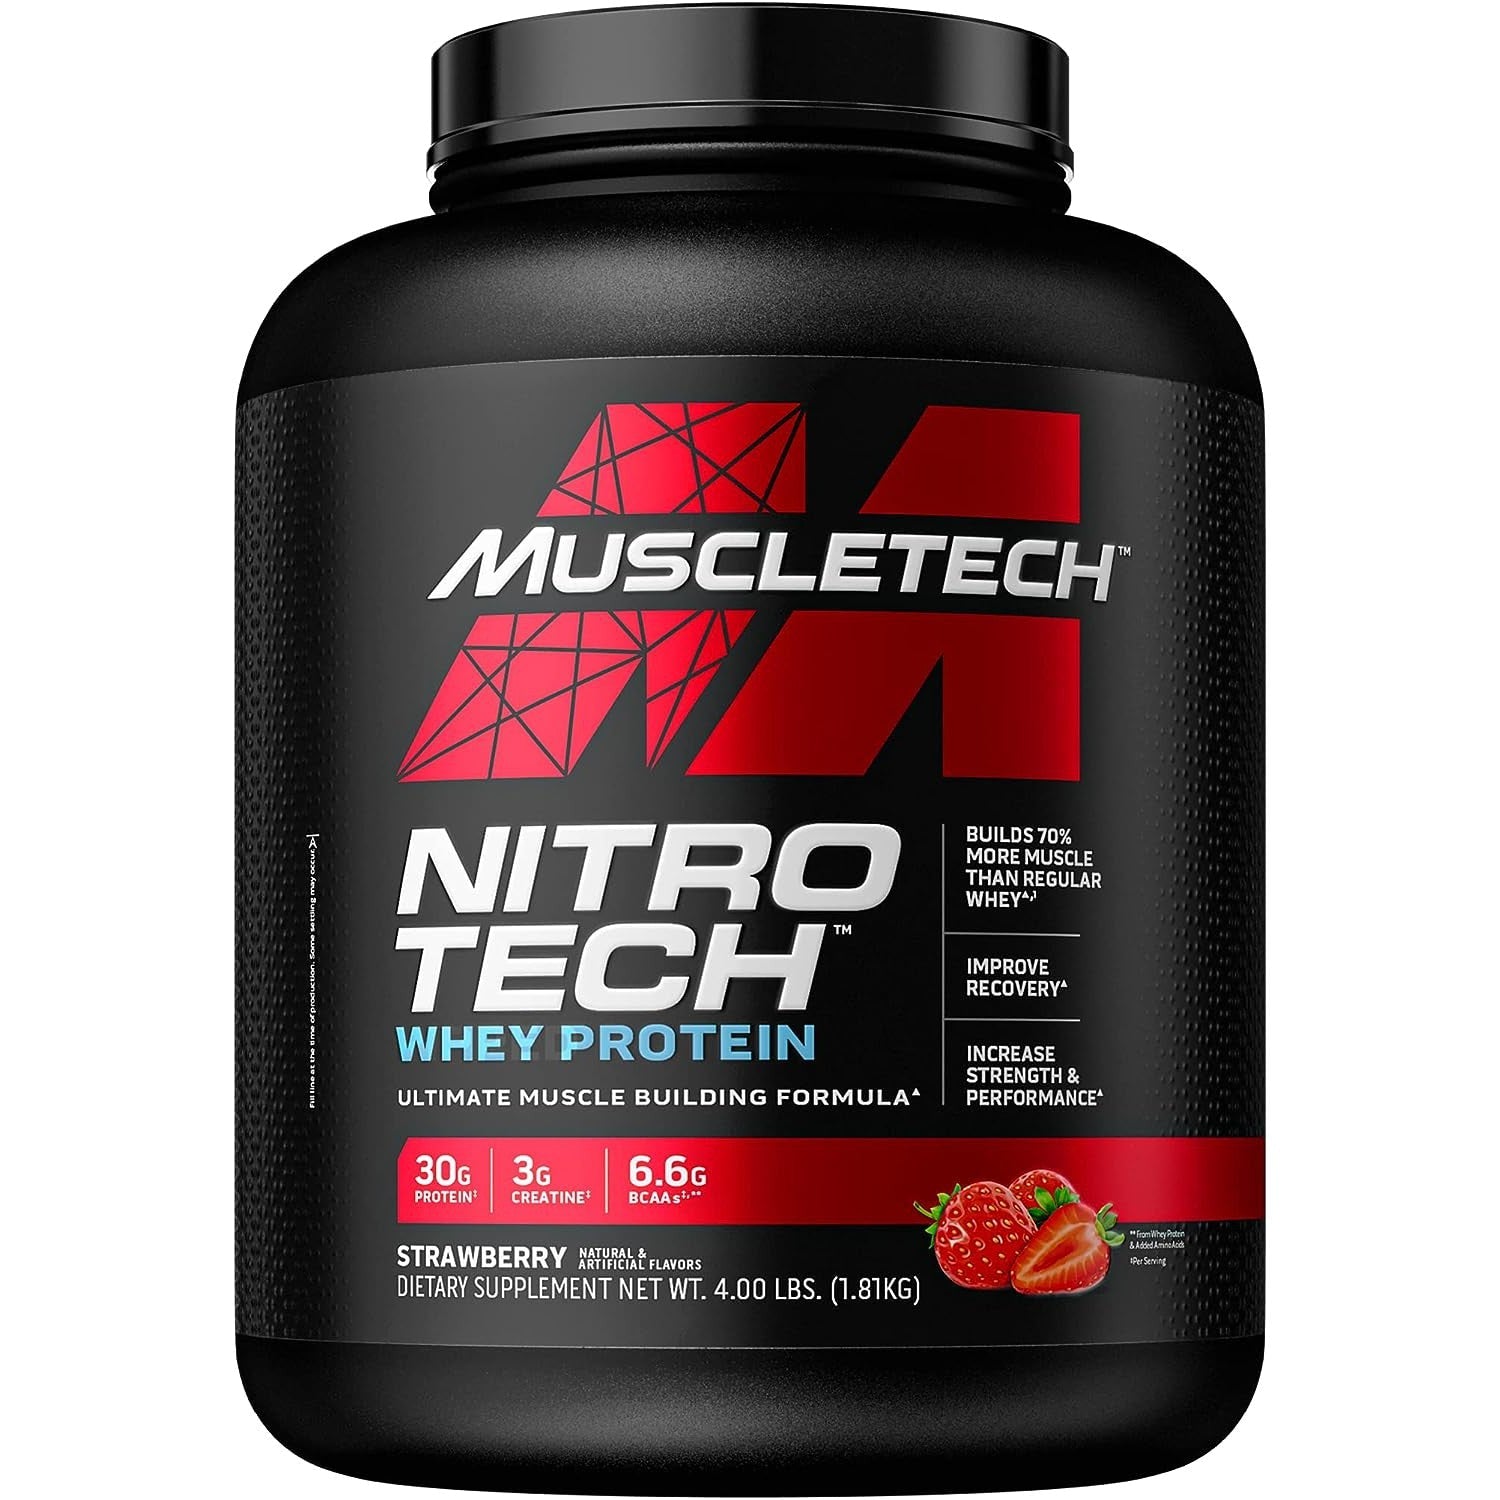 MuscleTech Whey Protein Powder Nitro-Tech | Isolate, Concentrate & Peptides | Protein + Creatine for Muscle Gain Strawberry 1.82 KG